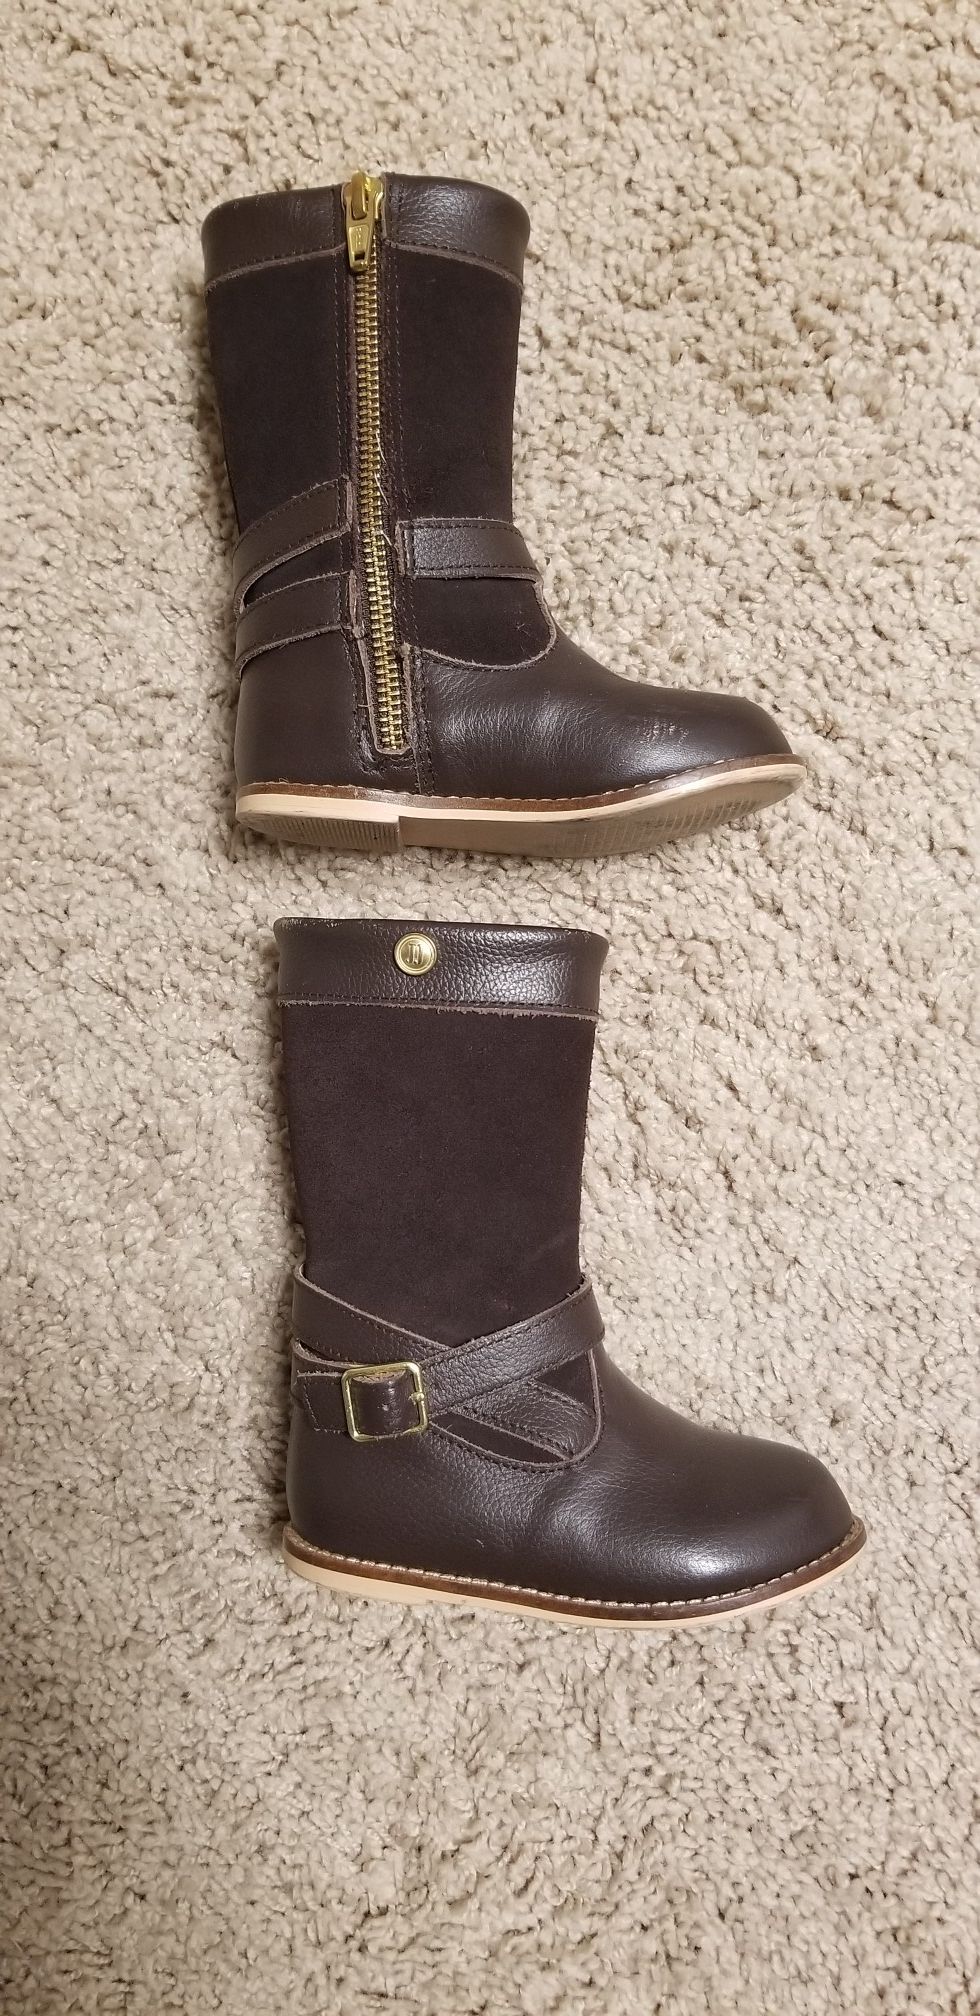 Janie and Jack girl's size 6 leather riding boots